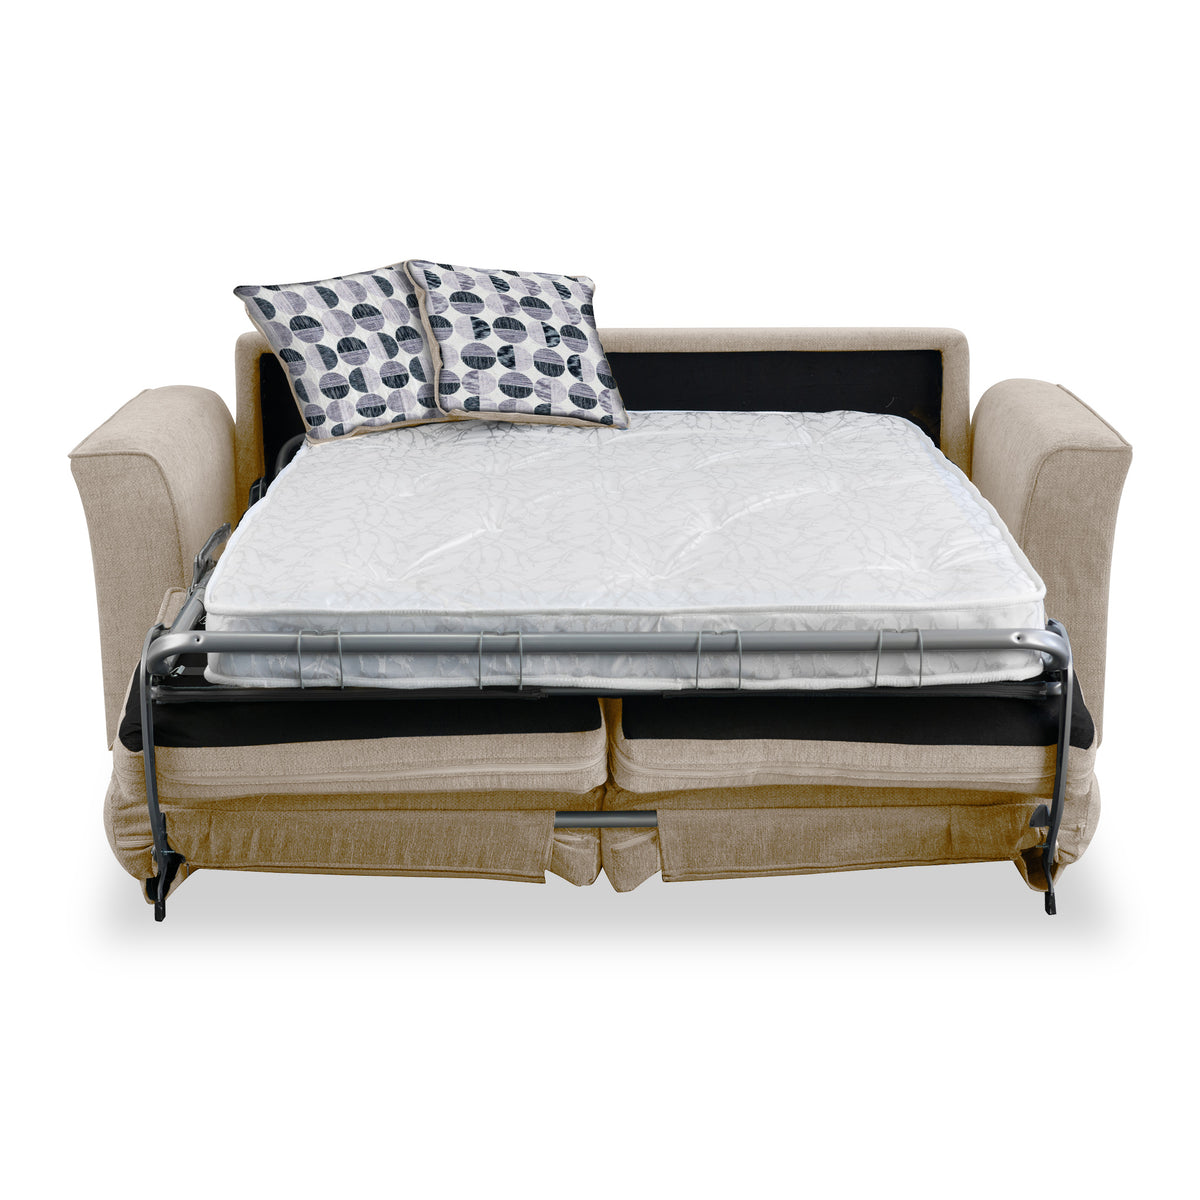 Boston 2 Seater Sofabed in Fawn with Rufus Mono Cushions by Roseland Furniture